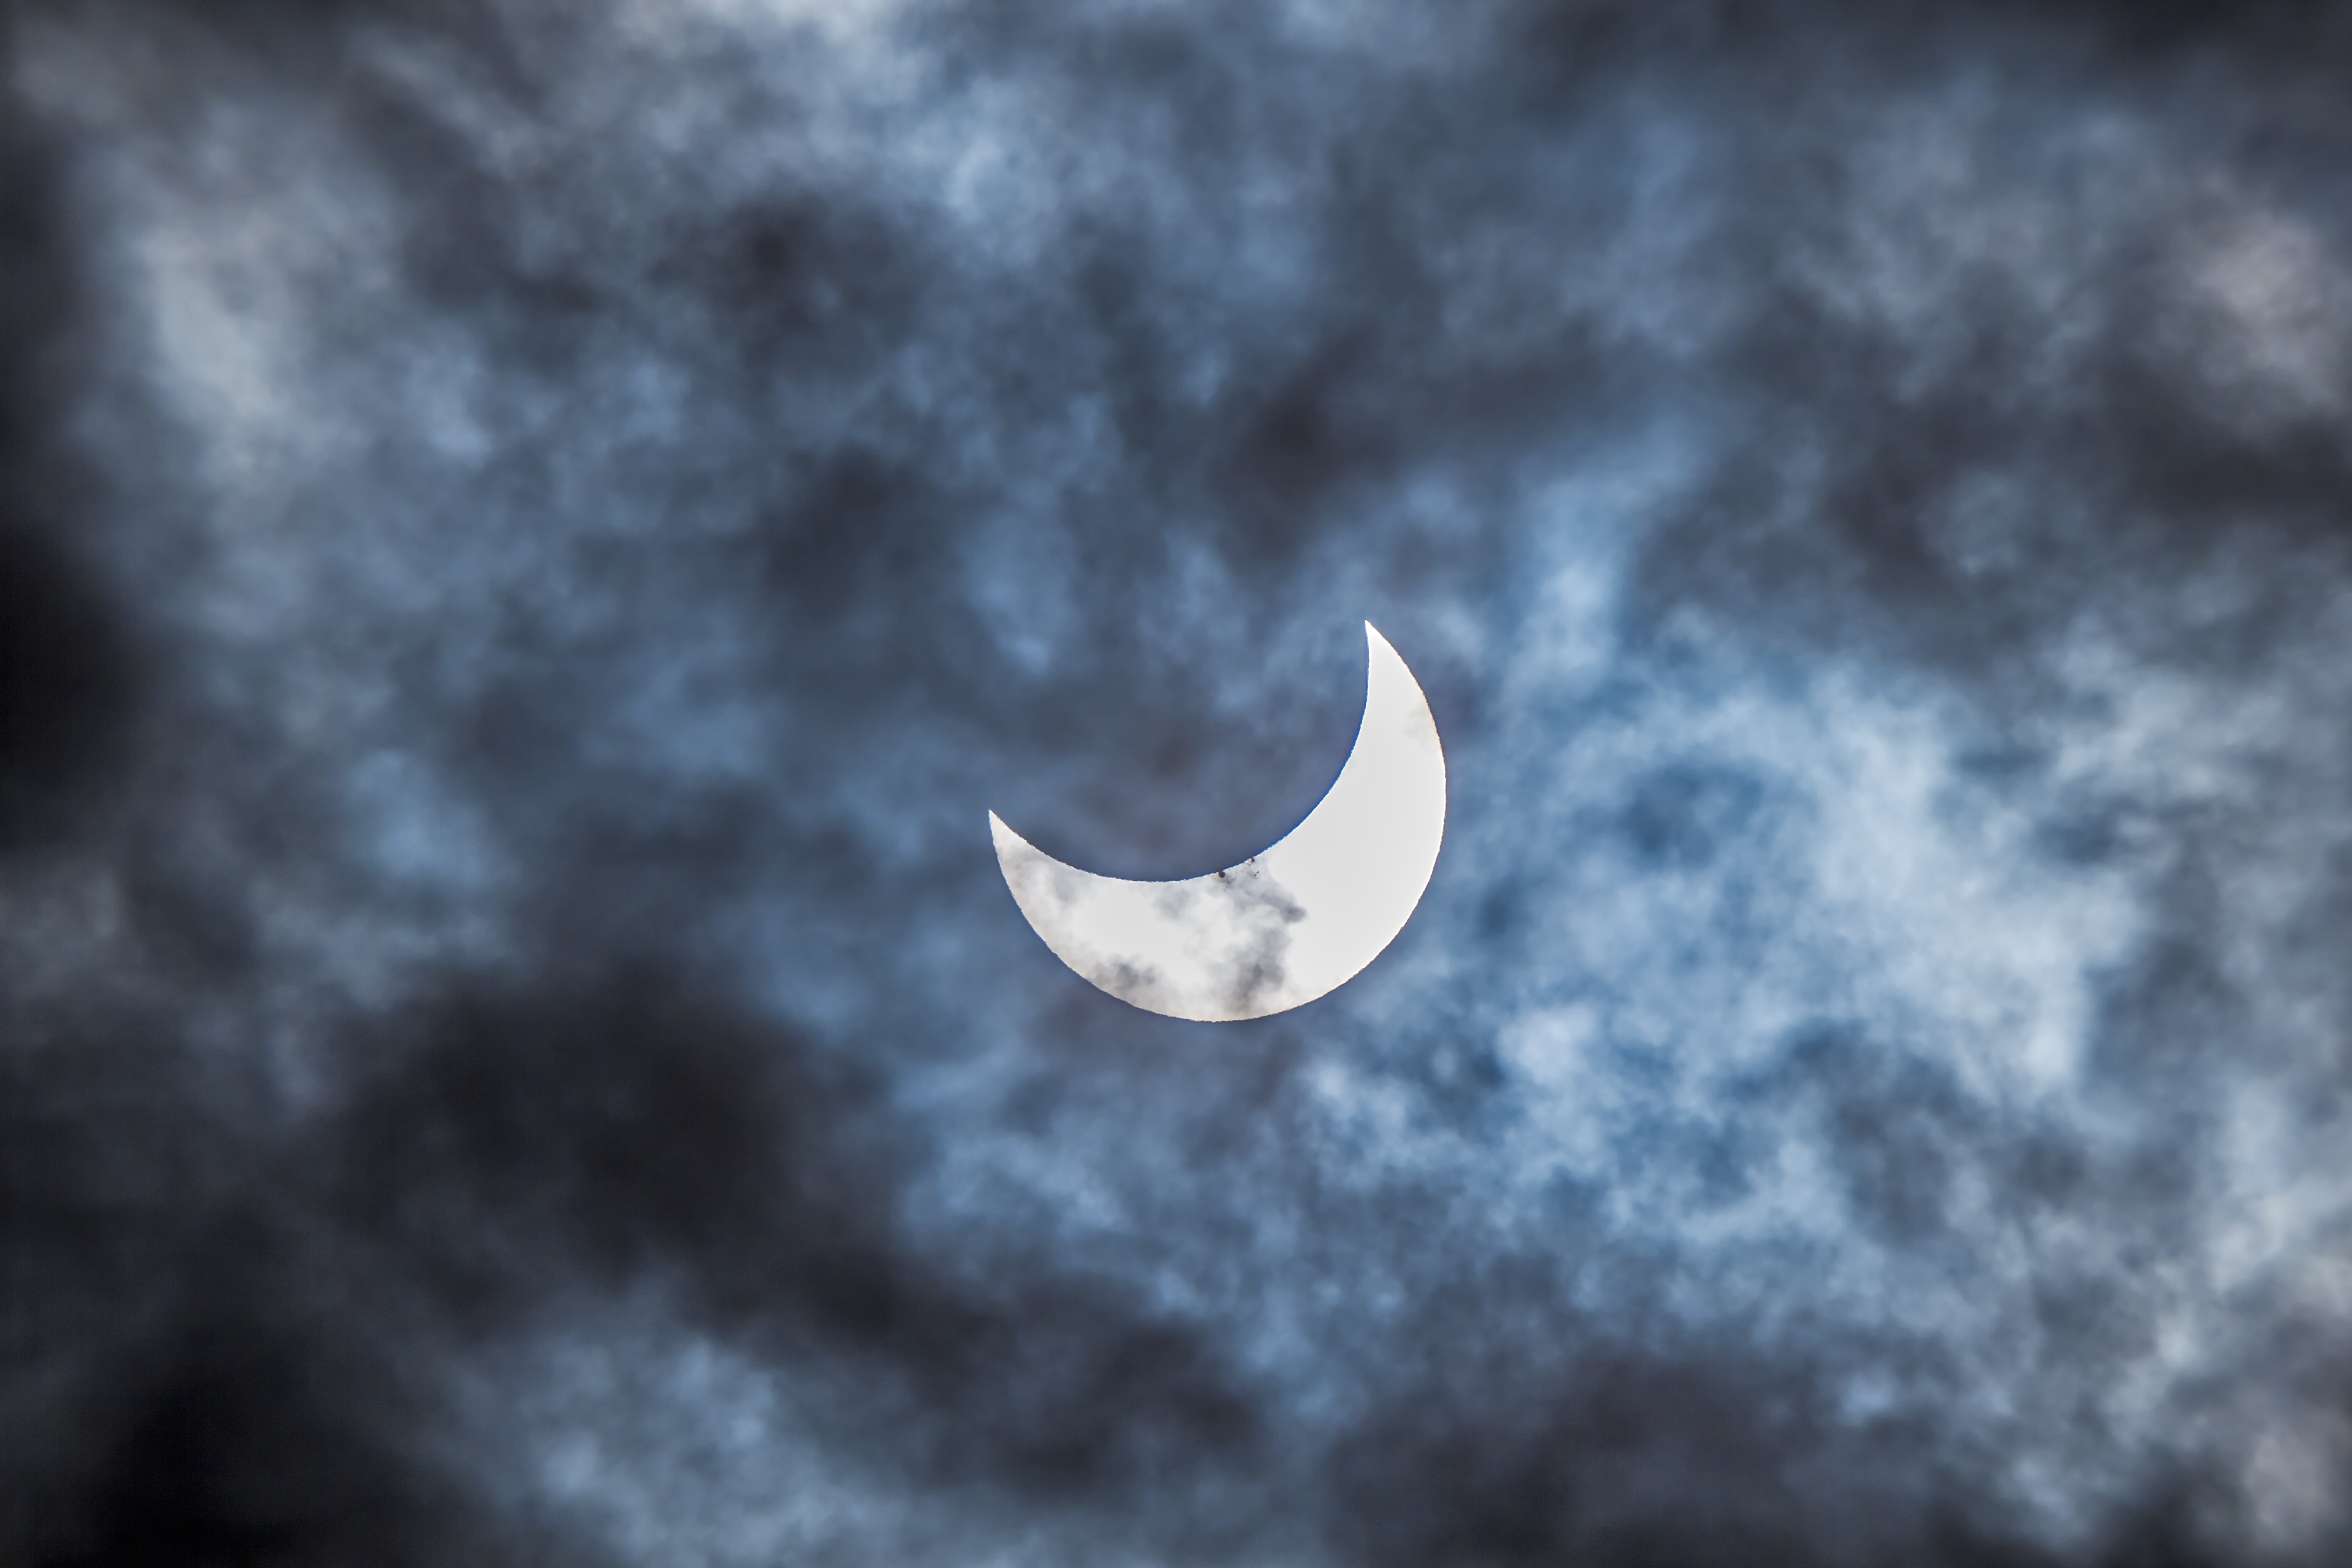 Not all clouds spell disaster for a total solar eclipse. This shot shows a partial eclipse underway behind cloud cover. A group of sunspots is visible near the edge of the lunar disk. 